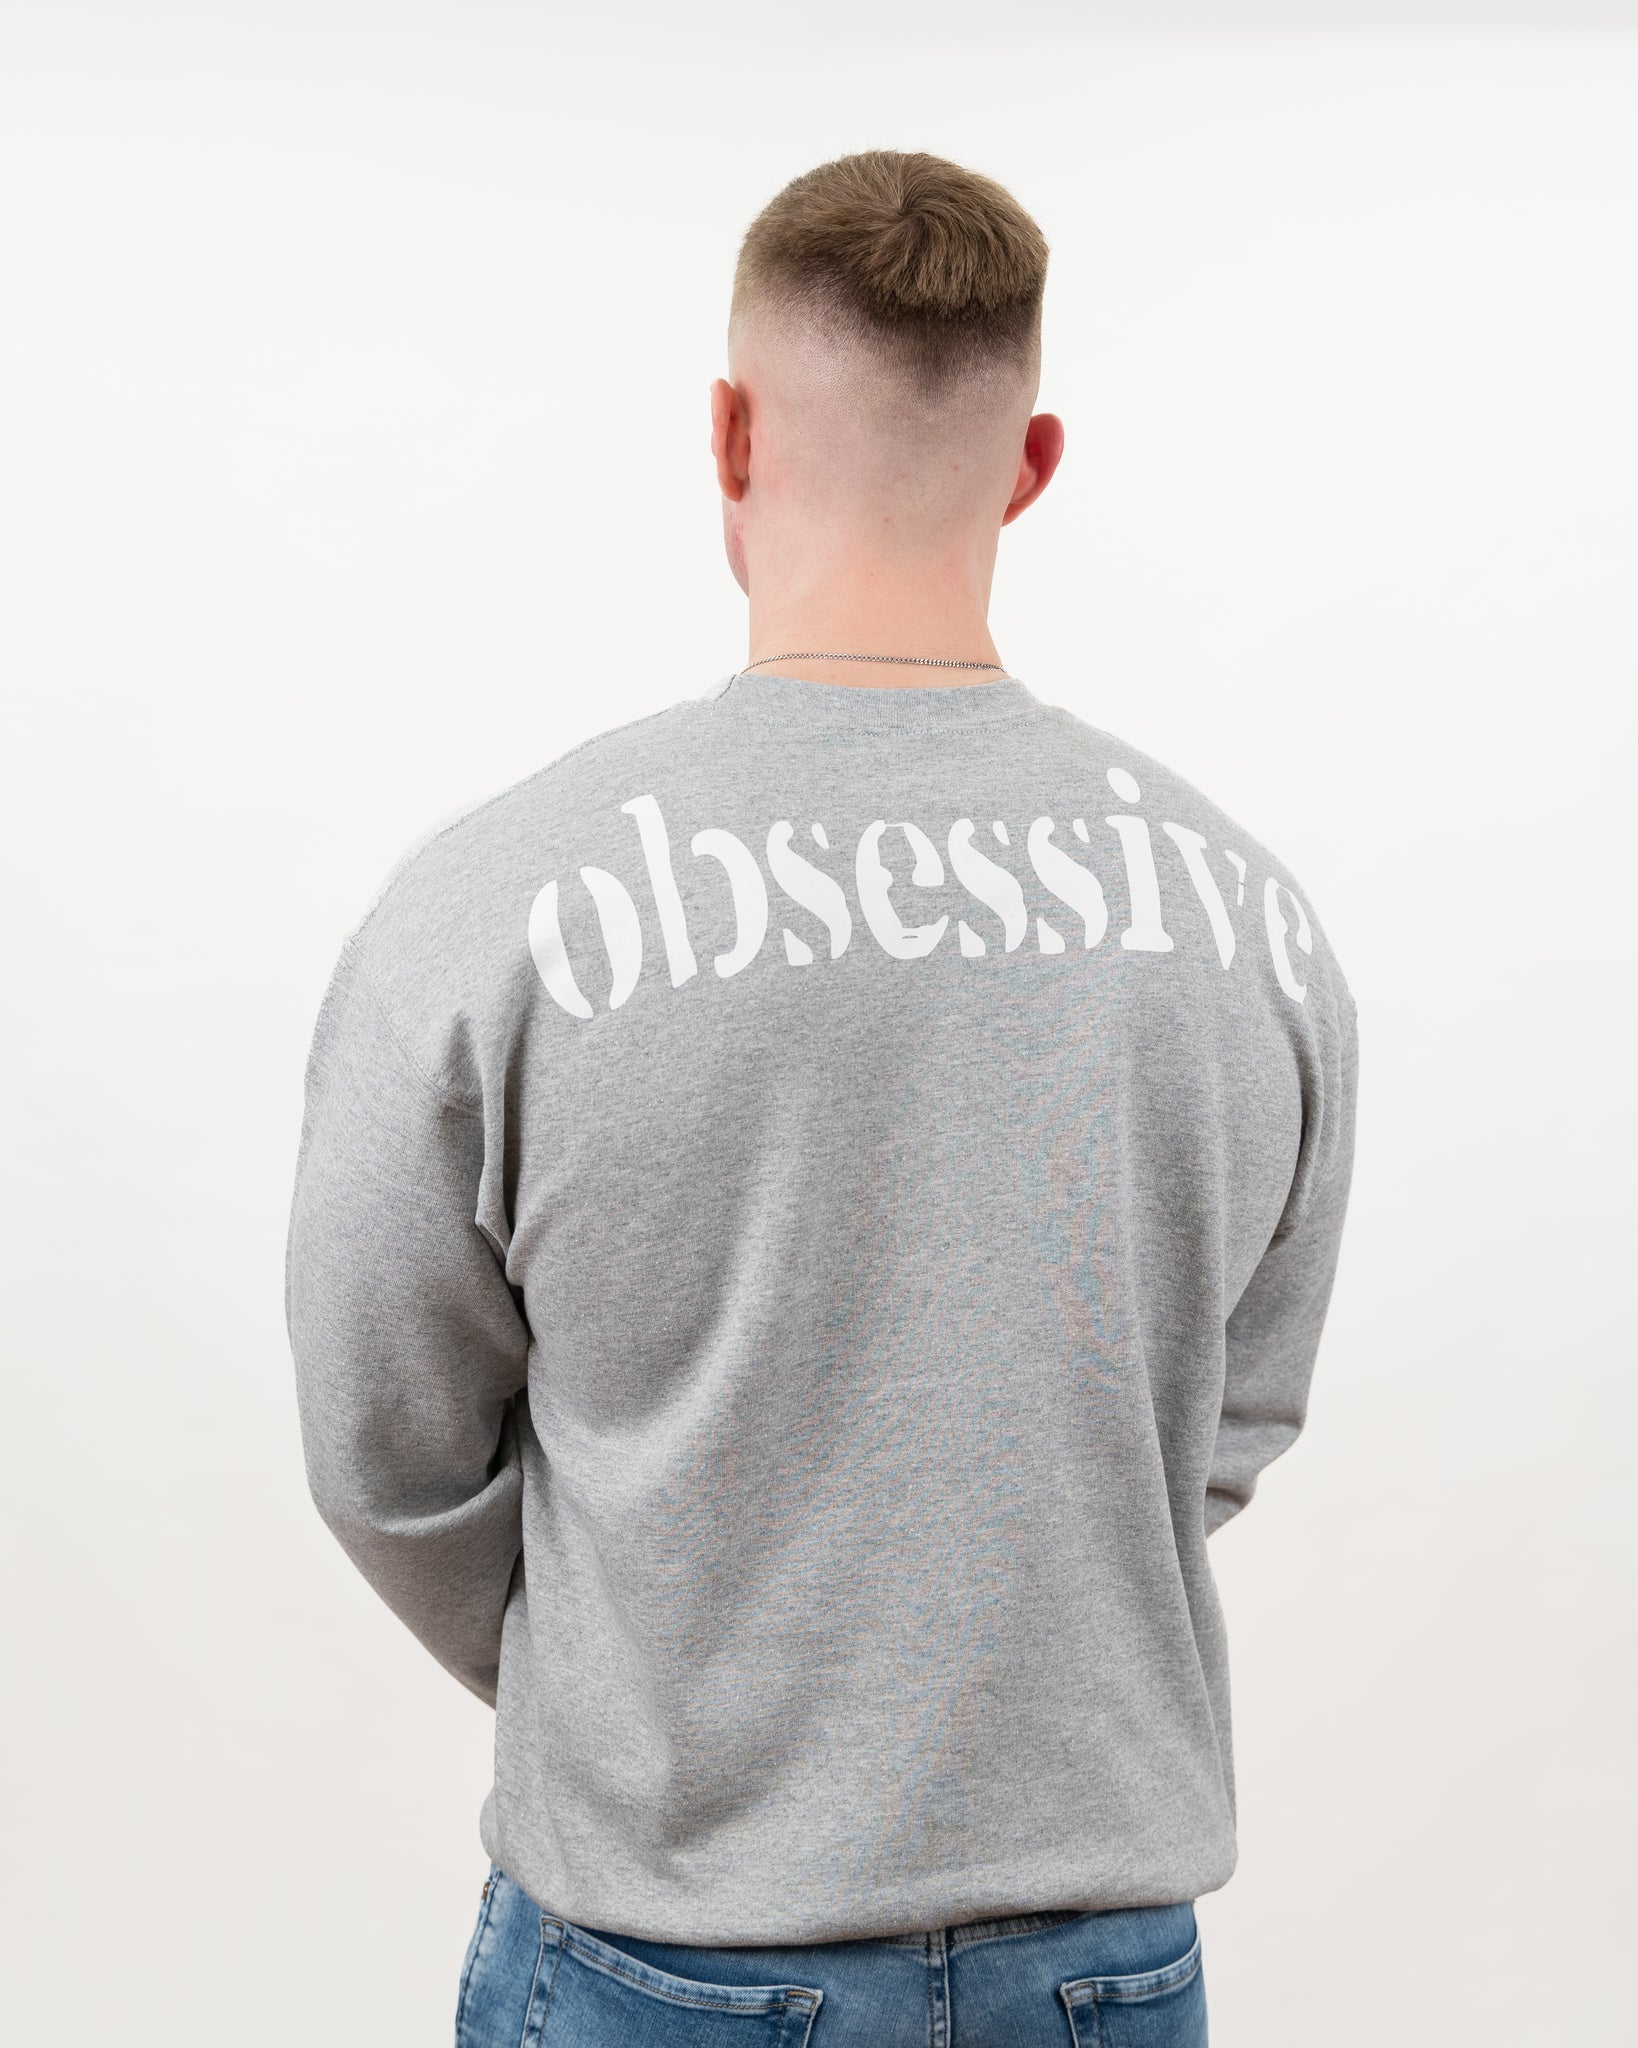 SWEATER OBSESSIVE - GRIS